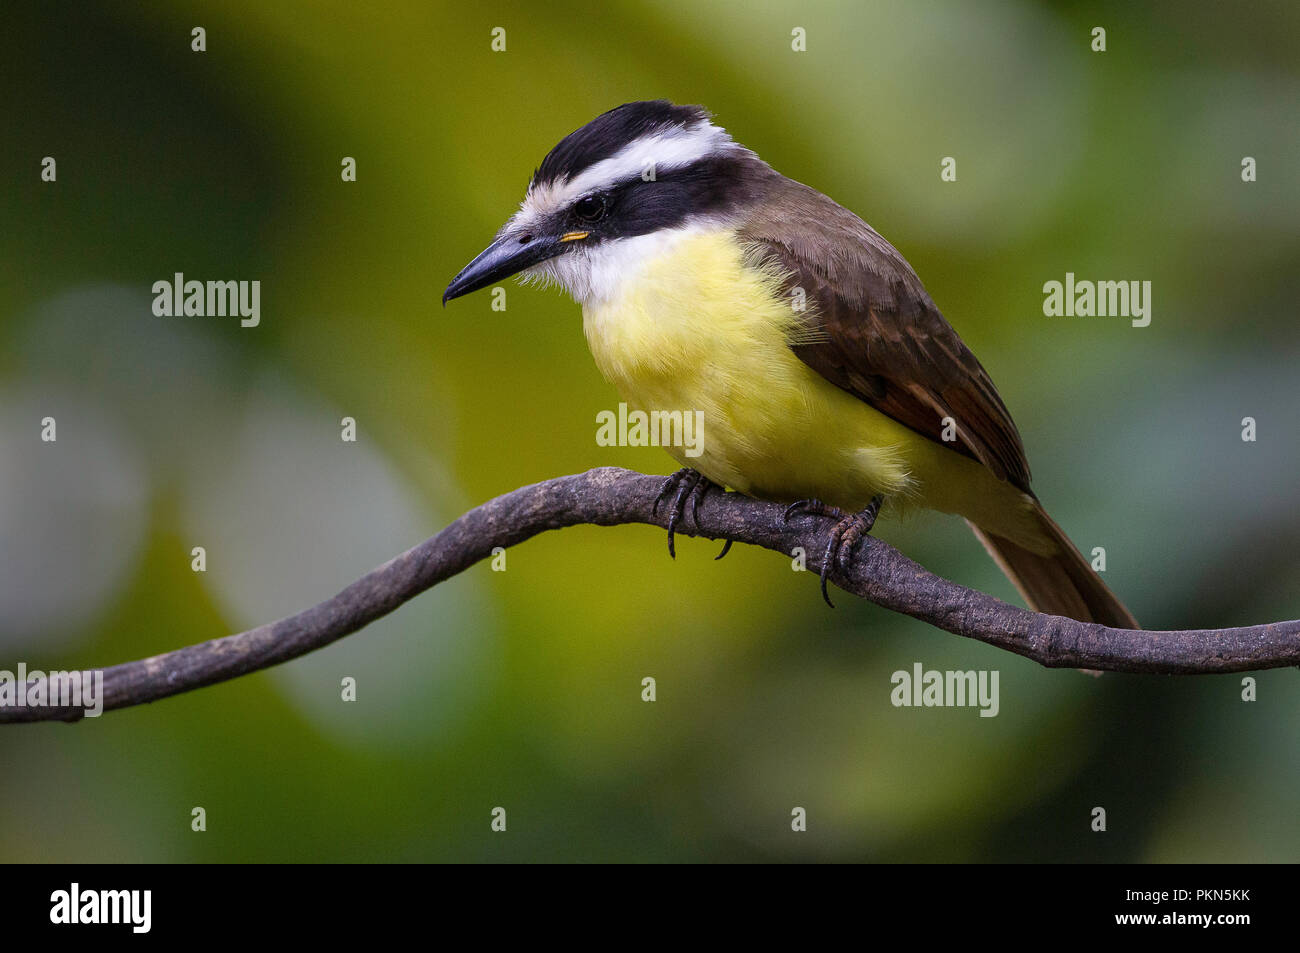 A perched great kiskadee photographed in Costa Rica Stock Photo